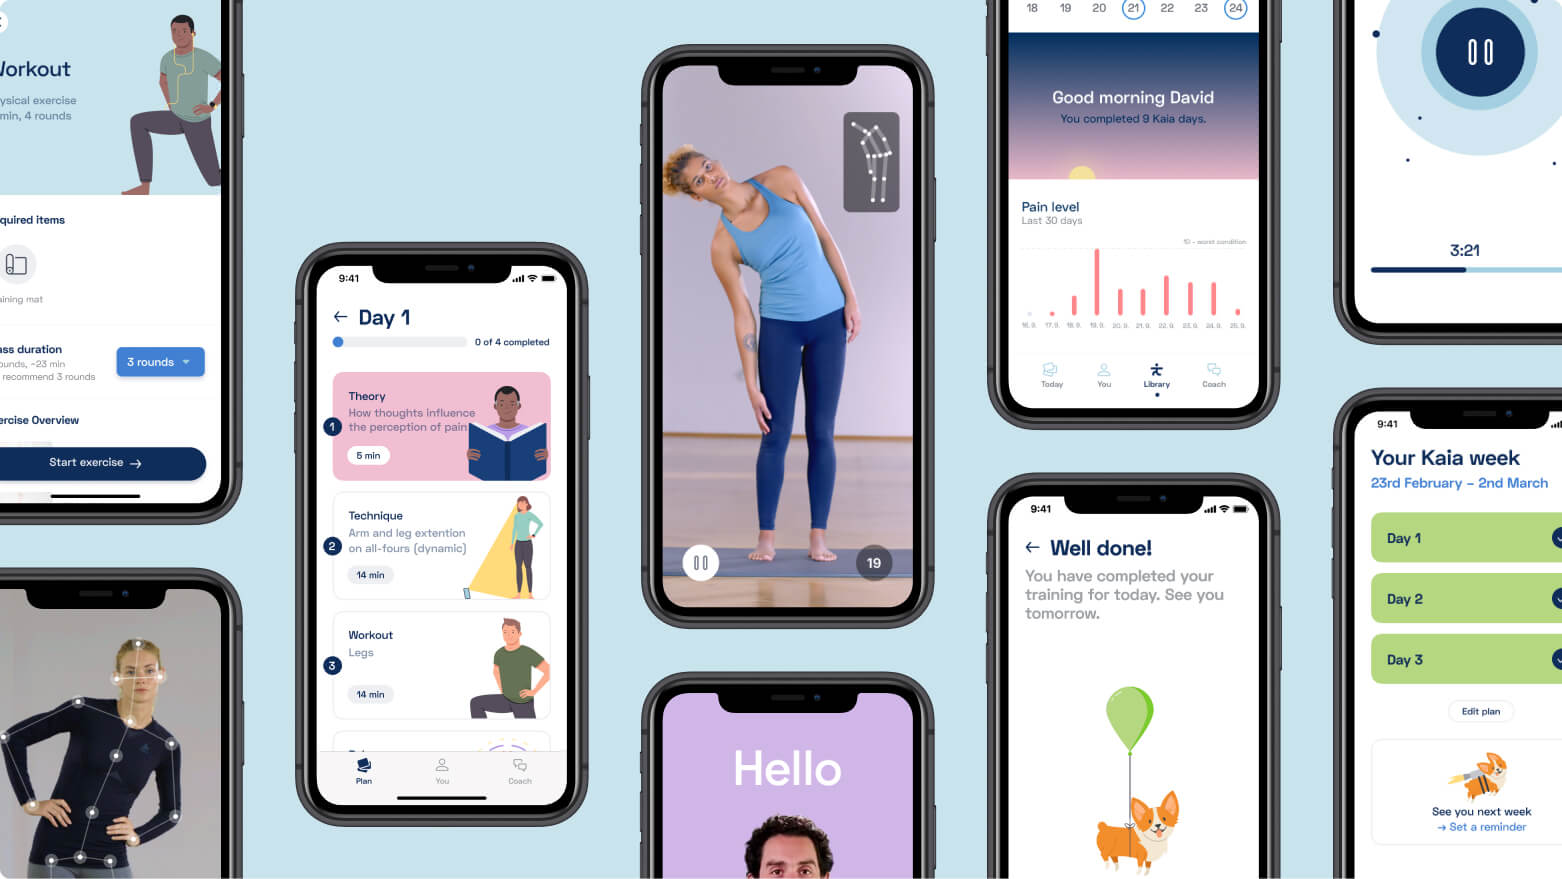 Collection of smartphone showing a woman stretching, an app, and workout routines.